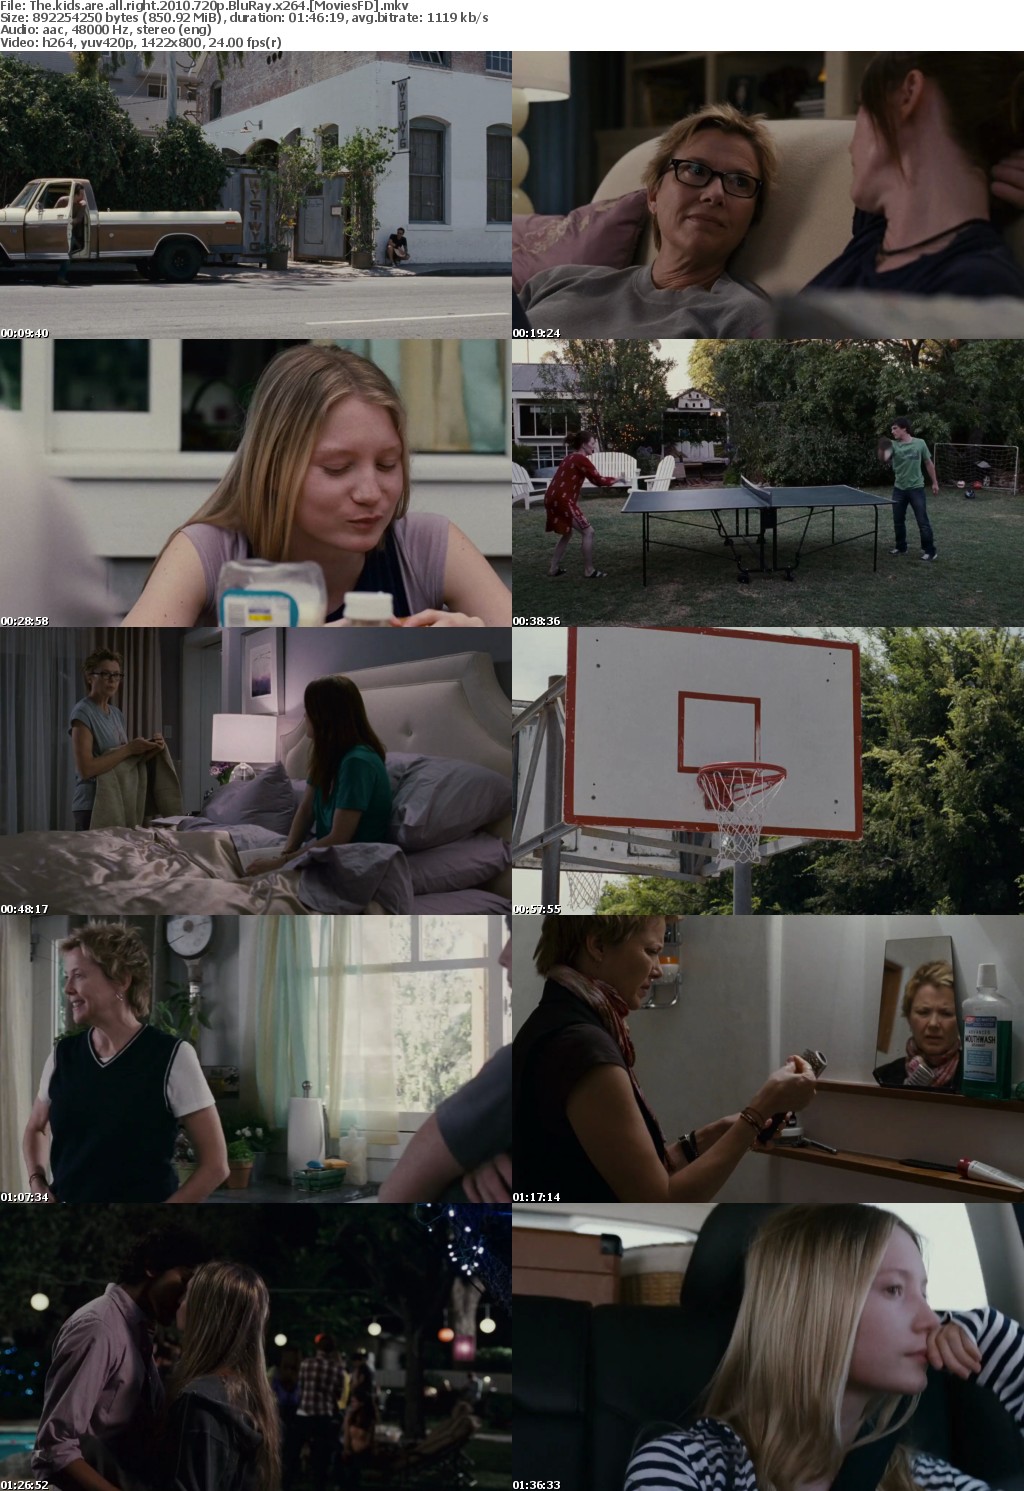 The Kids Are All Right (2010) 720p BluRay x264 - MoviesFD